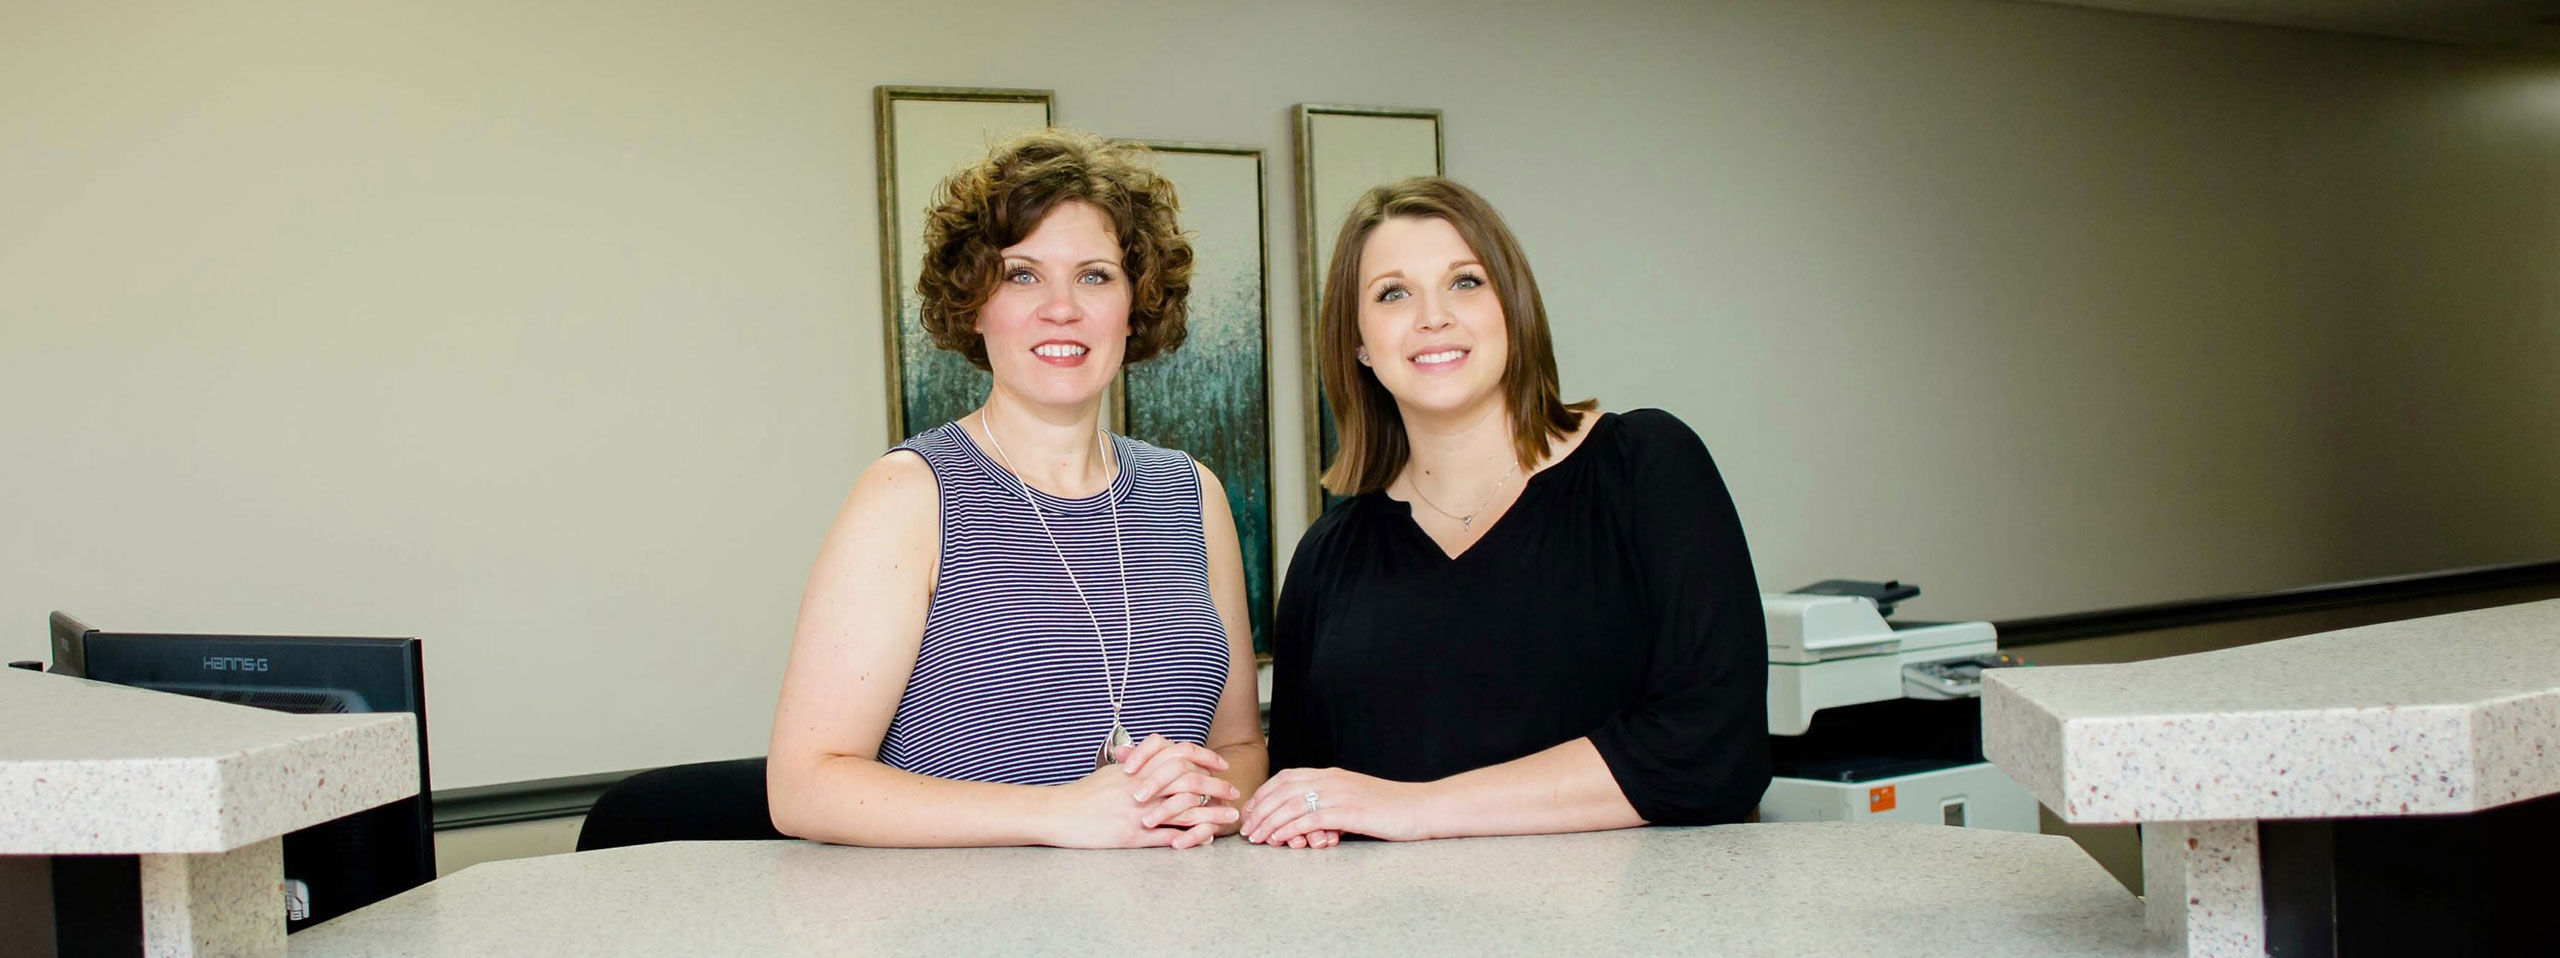 Cara Bowling certified public accountant and Lynn Smith